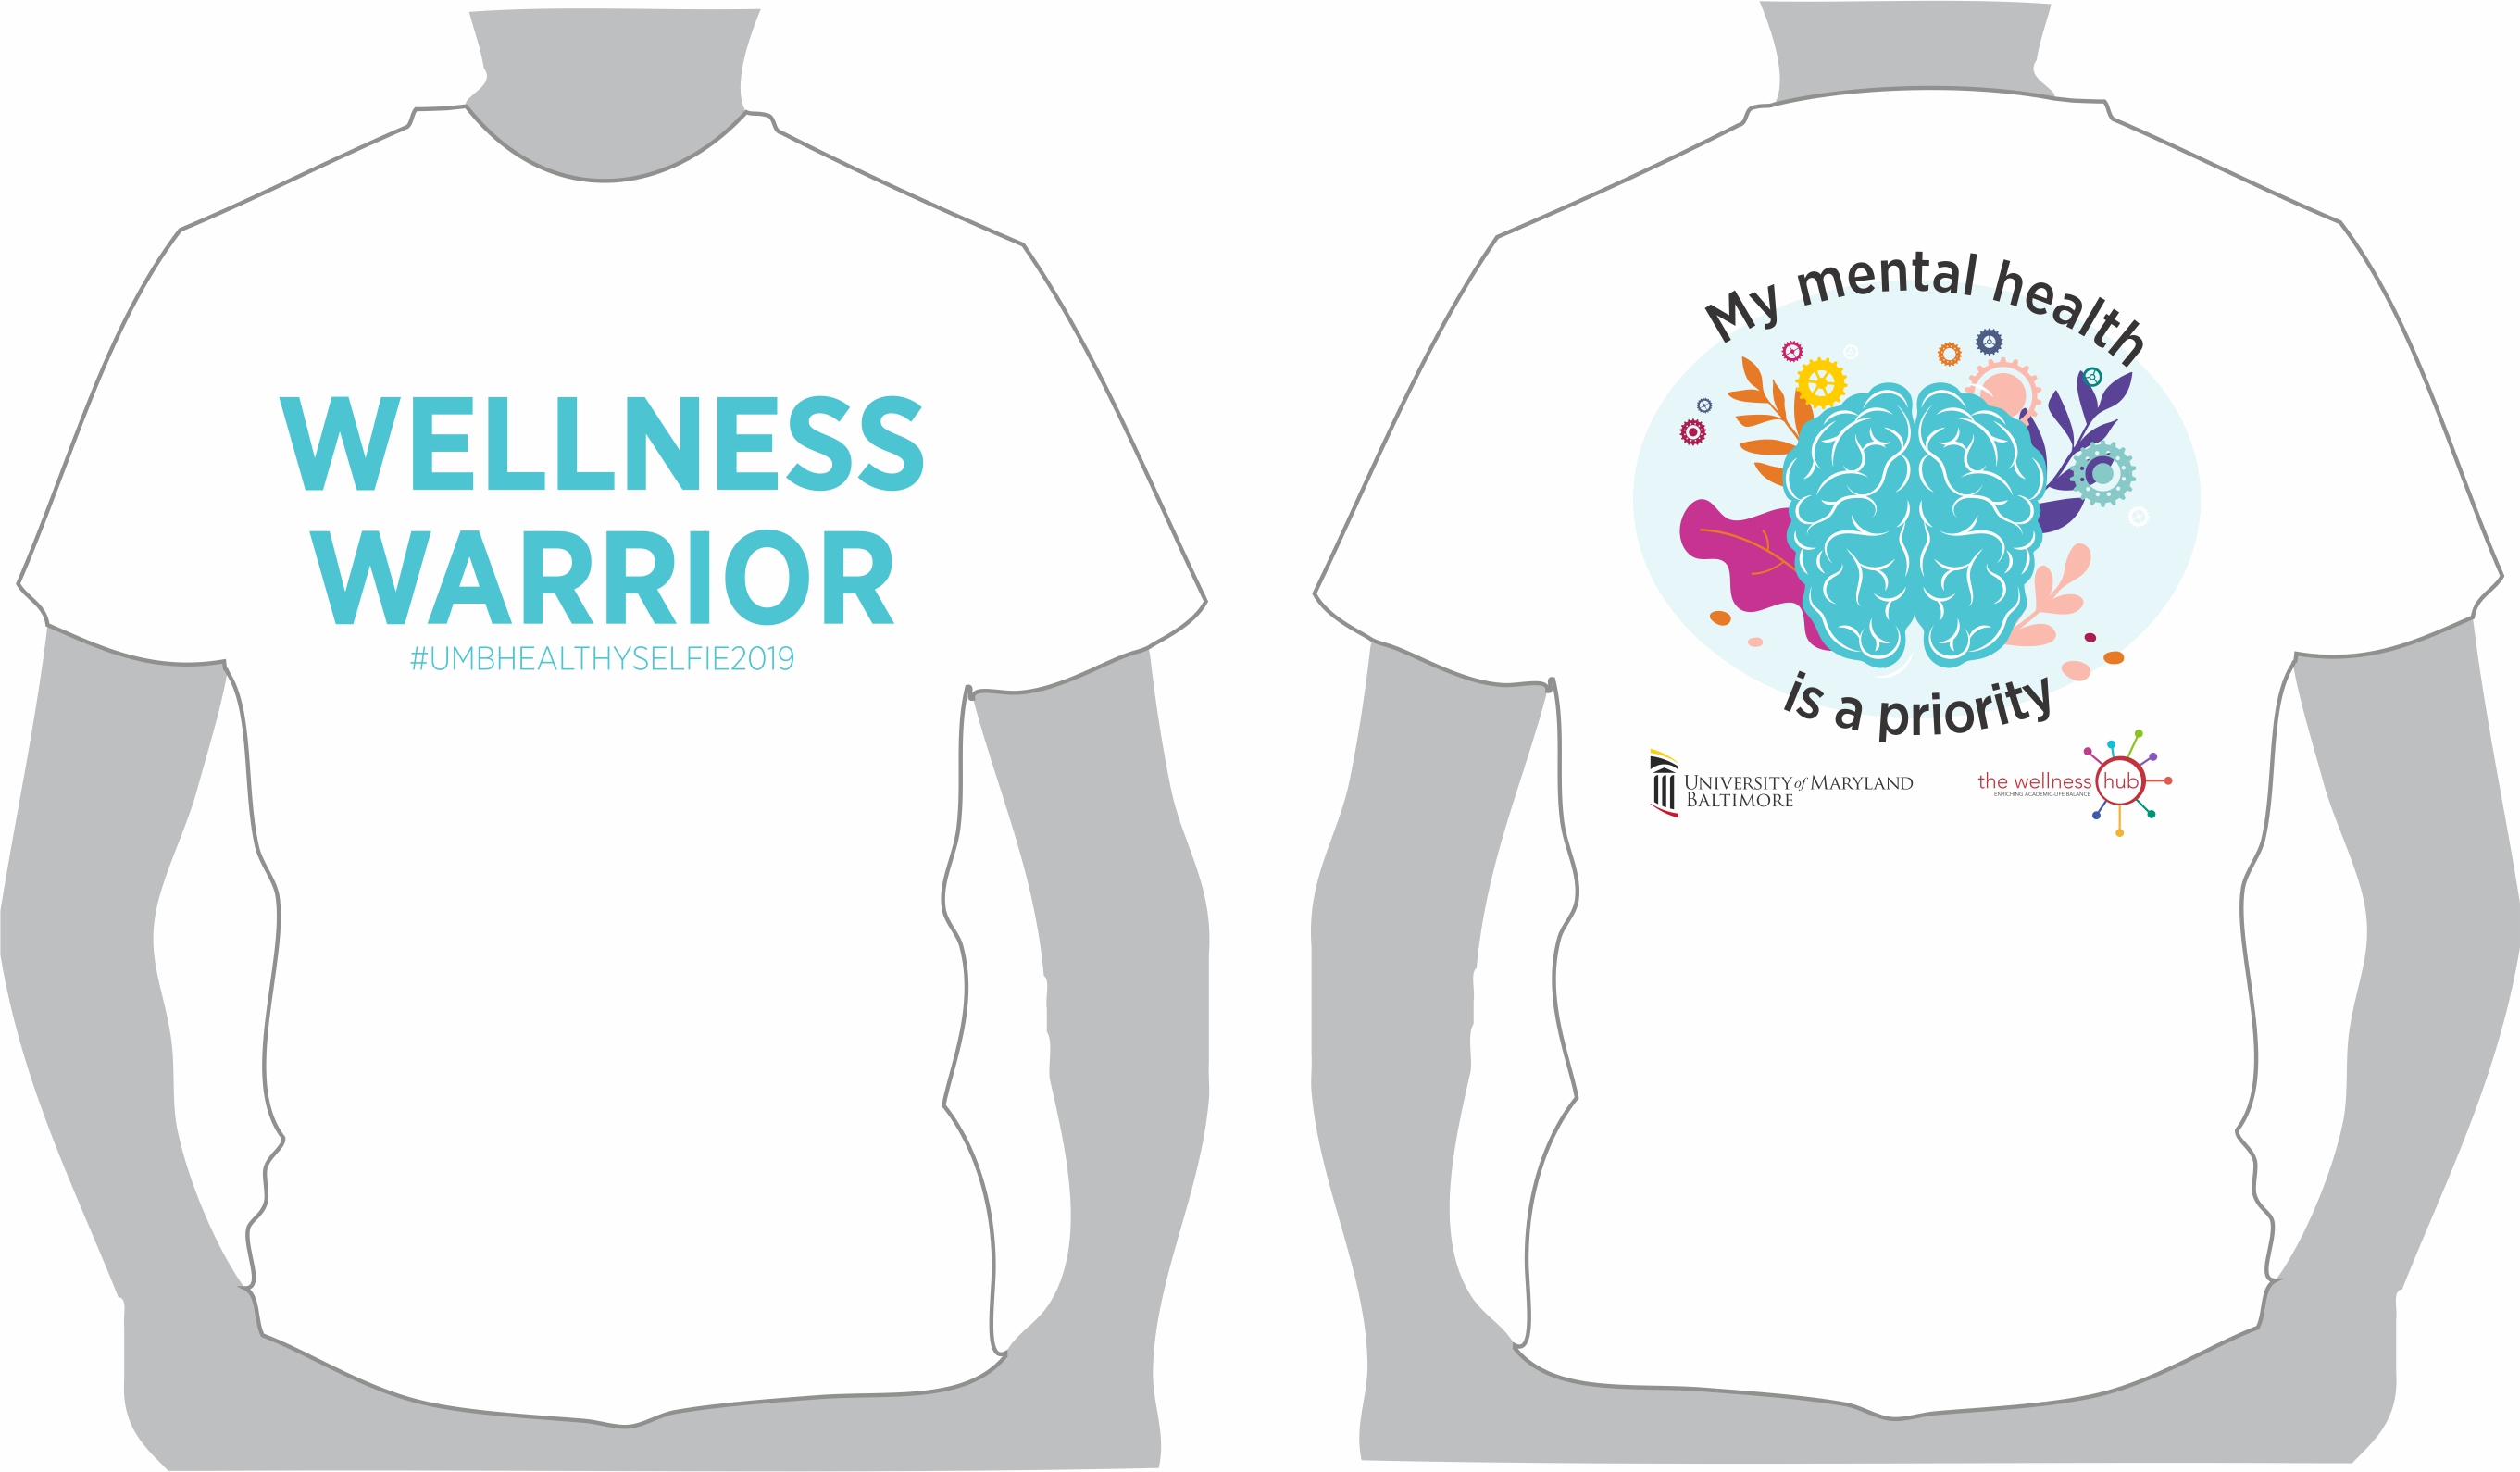 White Shirt with Wellness Warrior on front and My mental health is a priority on the back